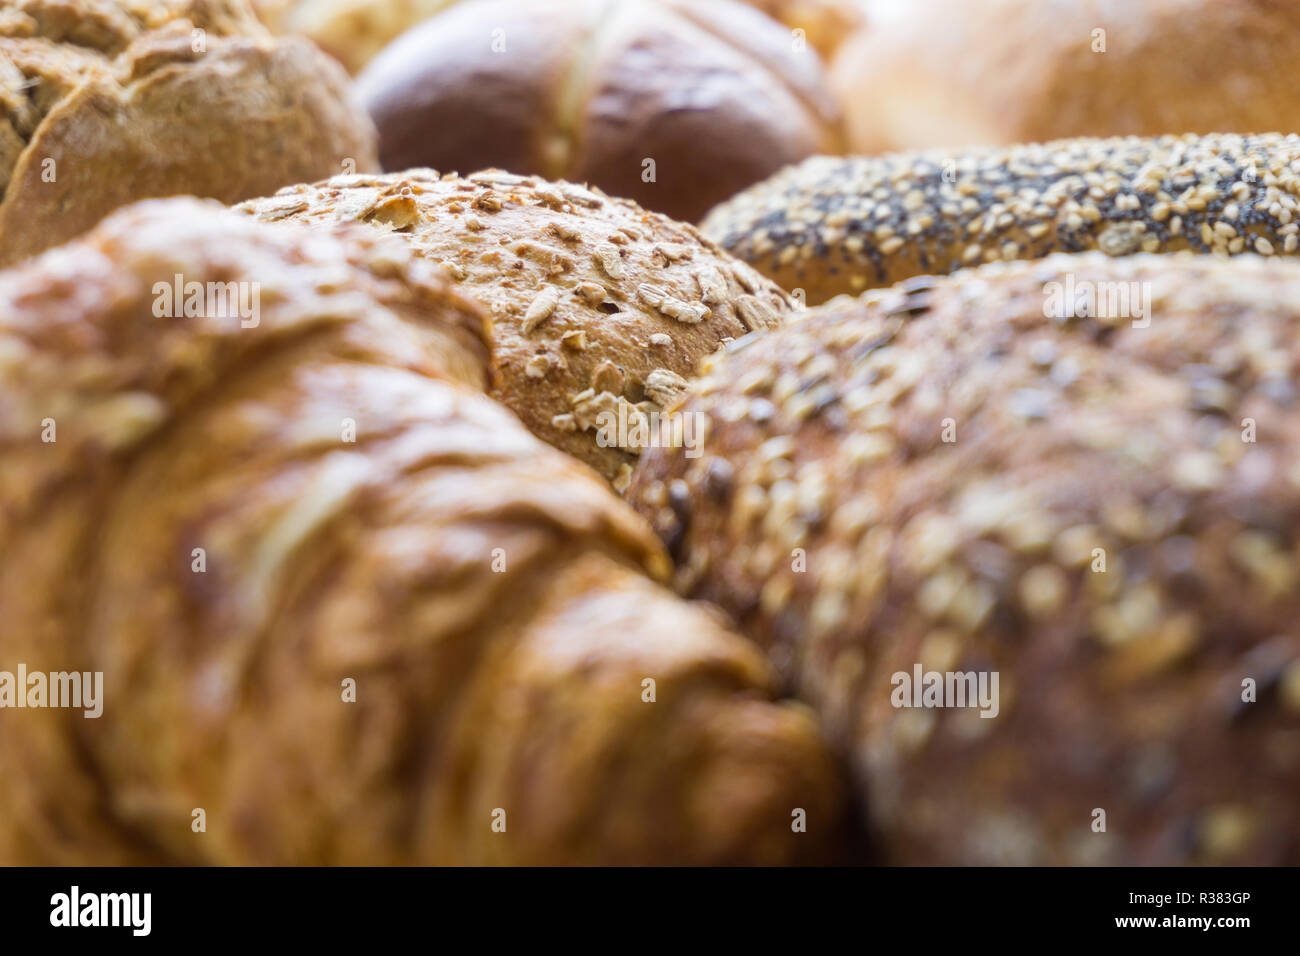 Close-up of Mixed Bread and baked Bread rolls usable as decorative Food Background. Freshly baked Whole-grain Bread Rolls with Sesame Seeds. Stock Photo